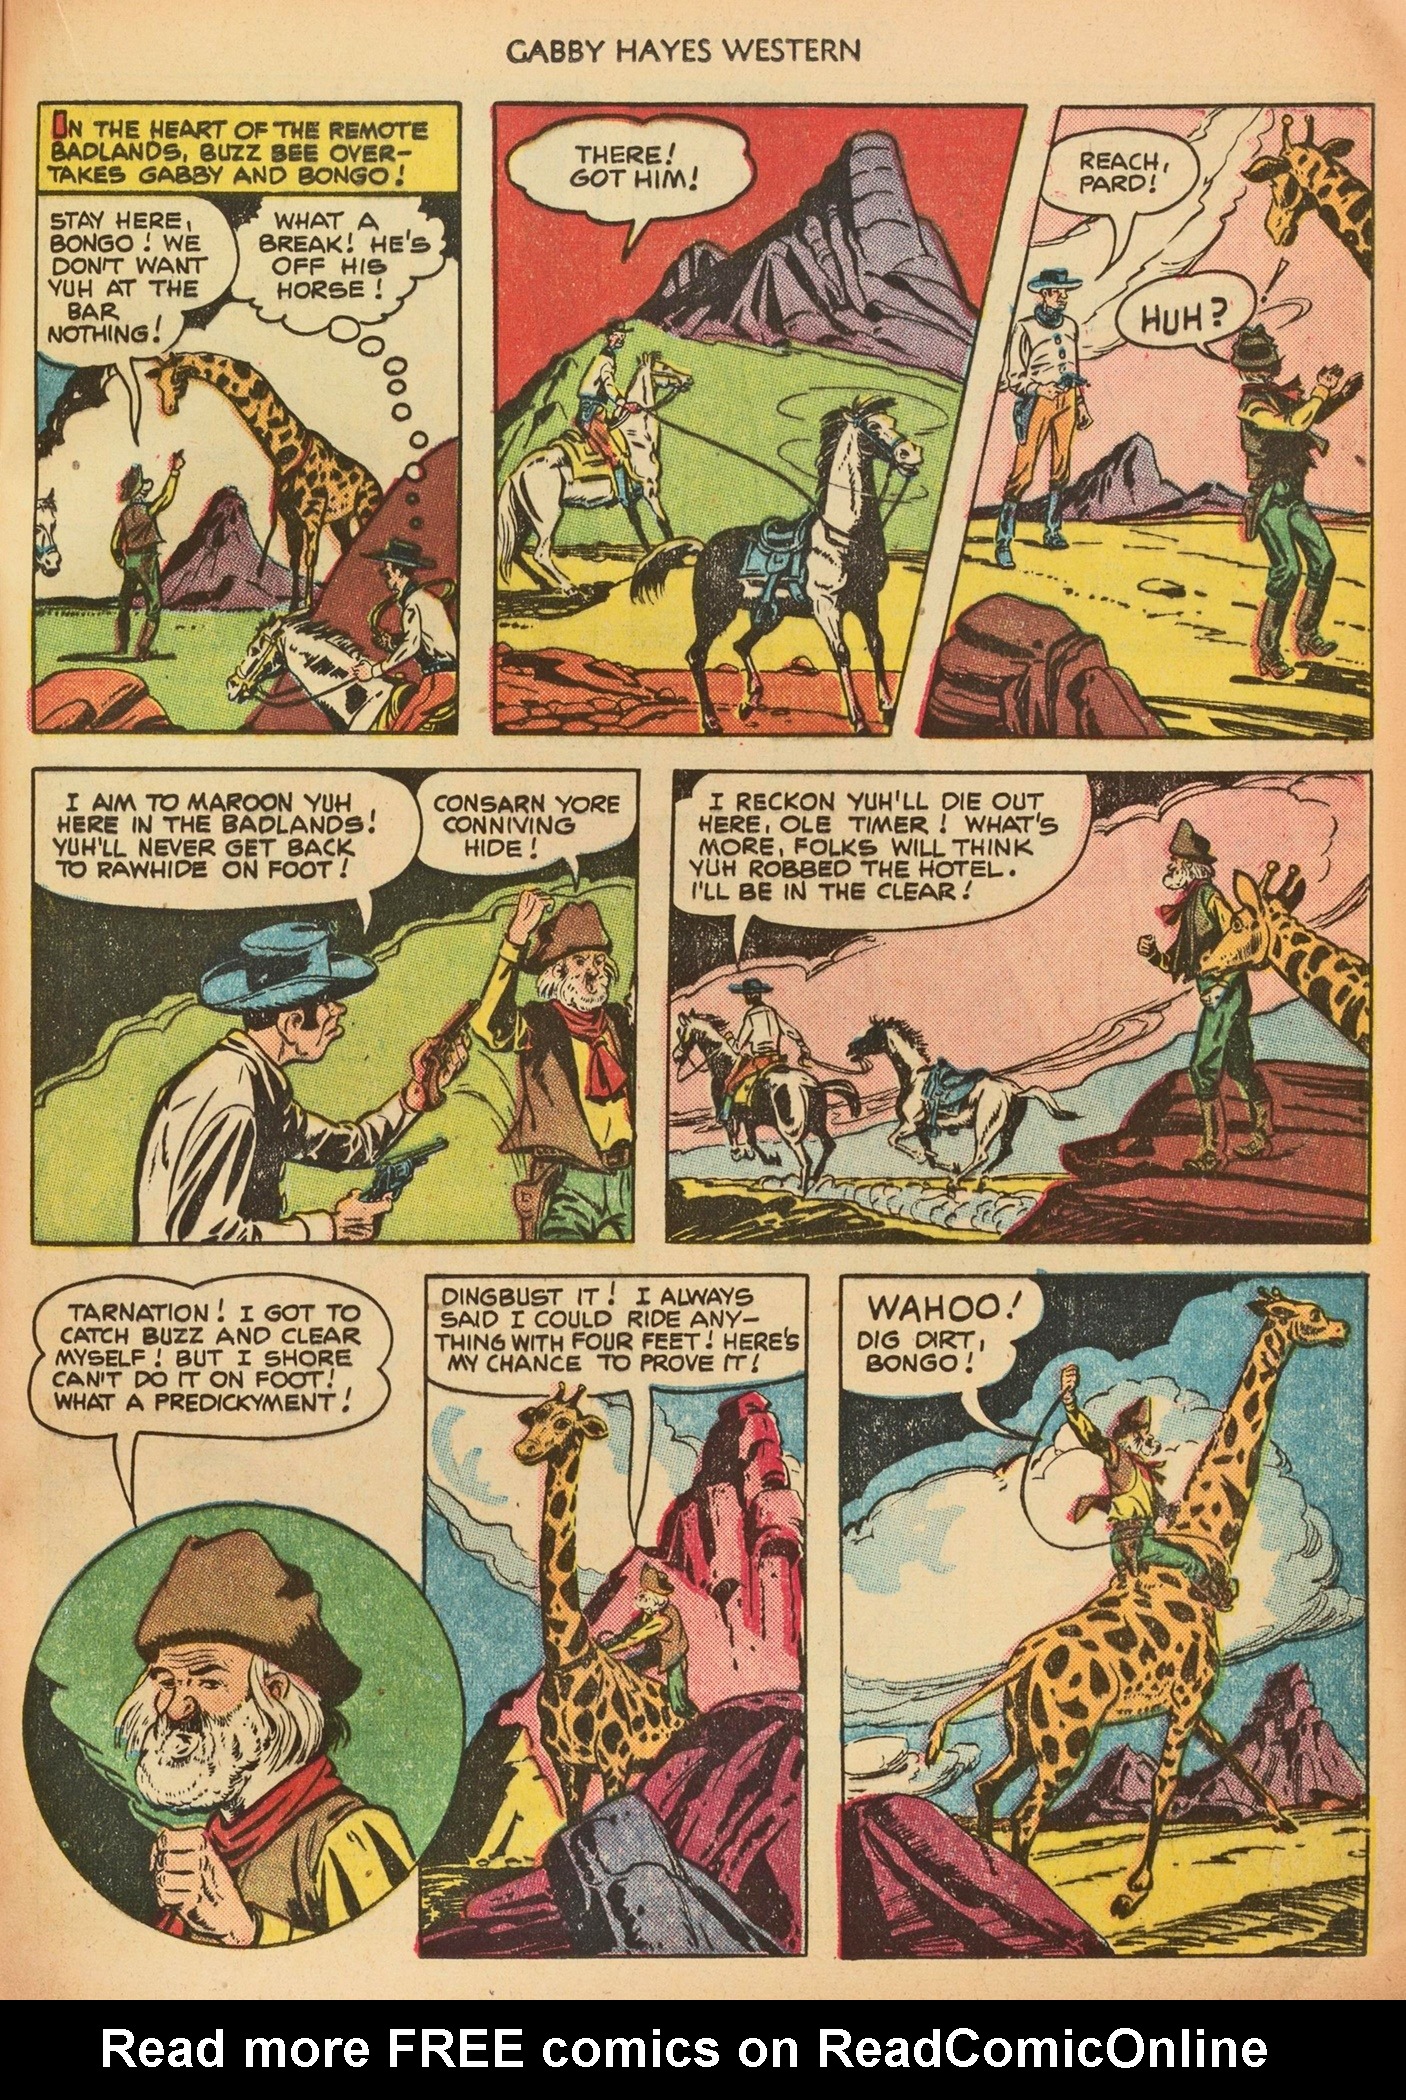 Read online Gabby Hayes Western comic -  Issue #36 - 17